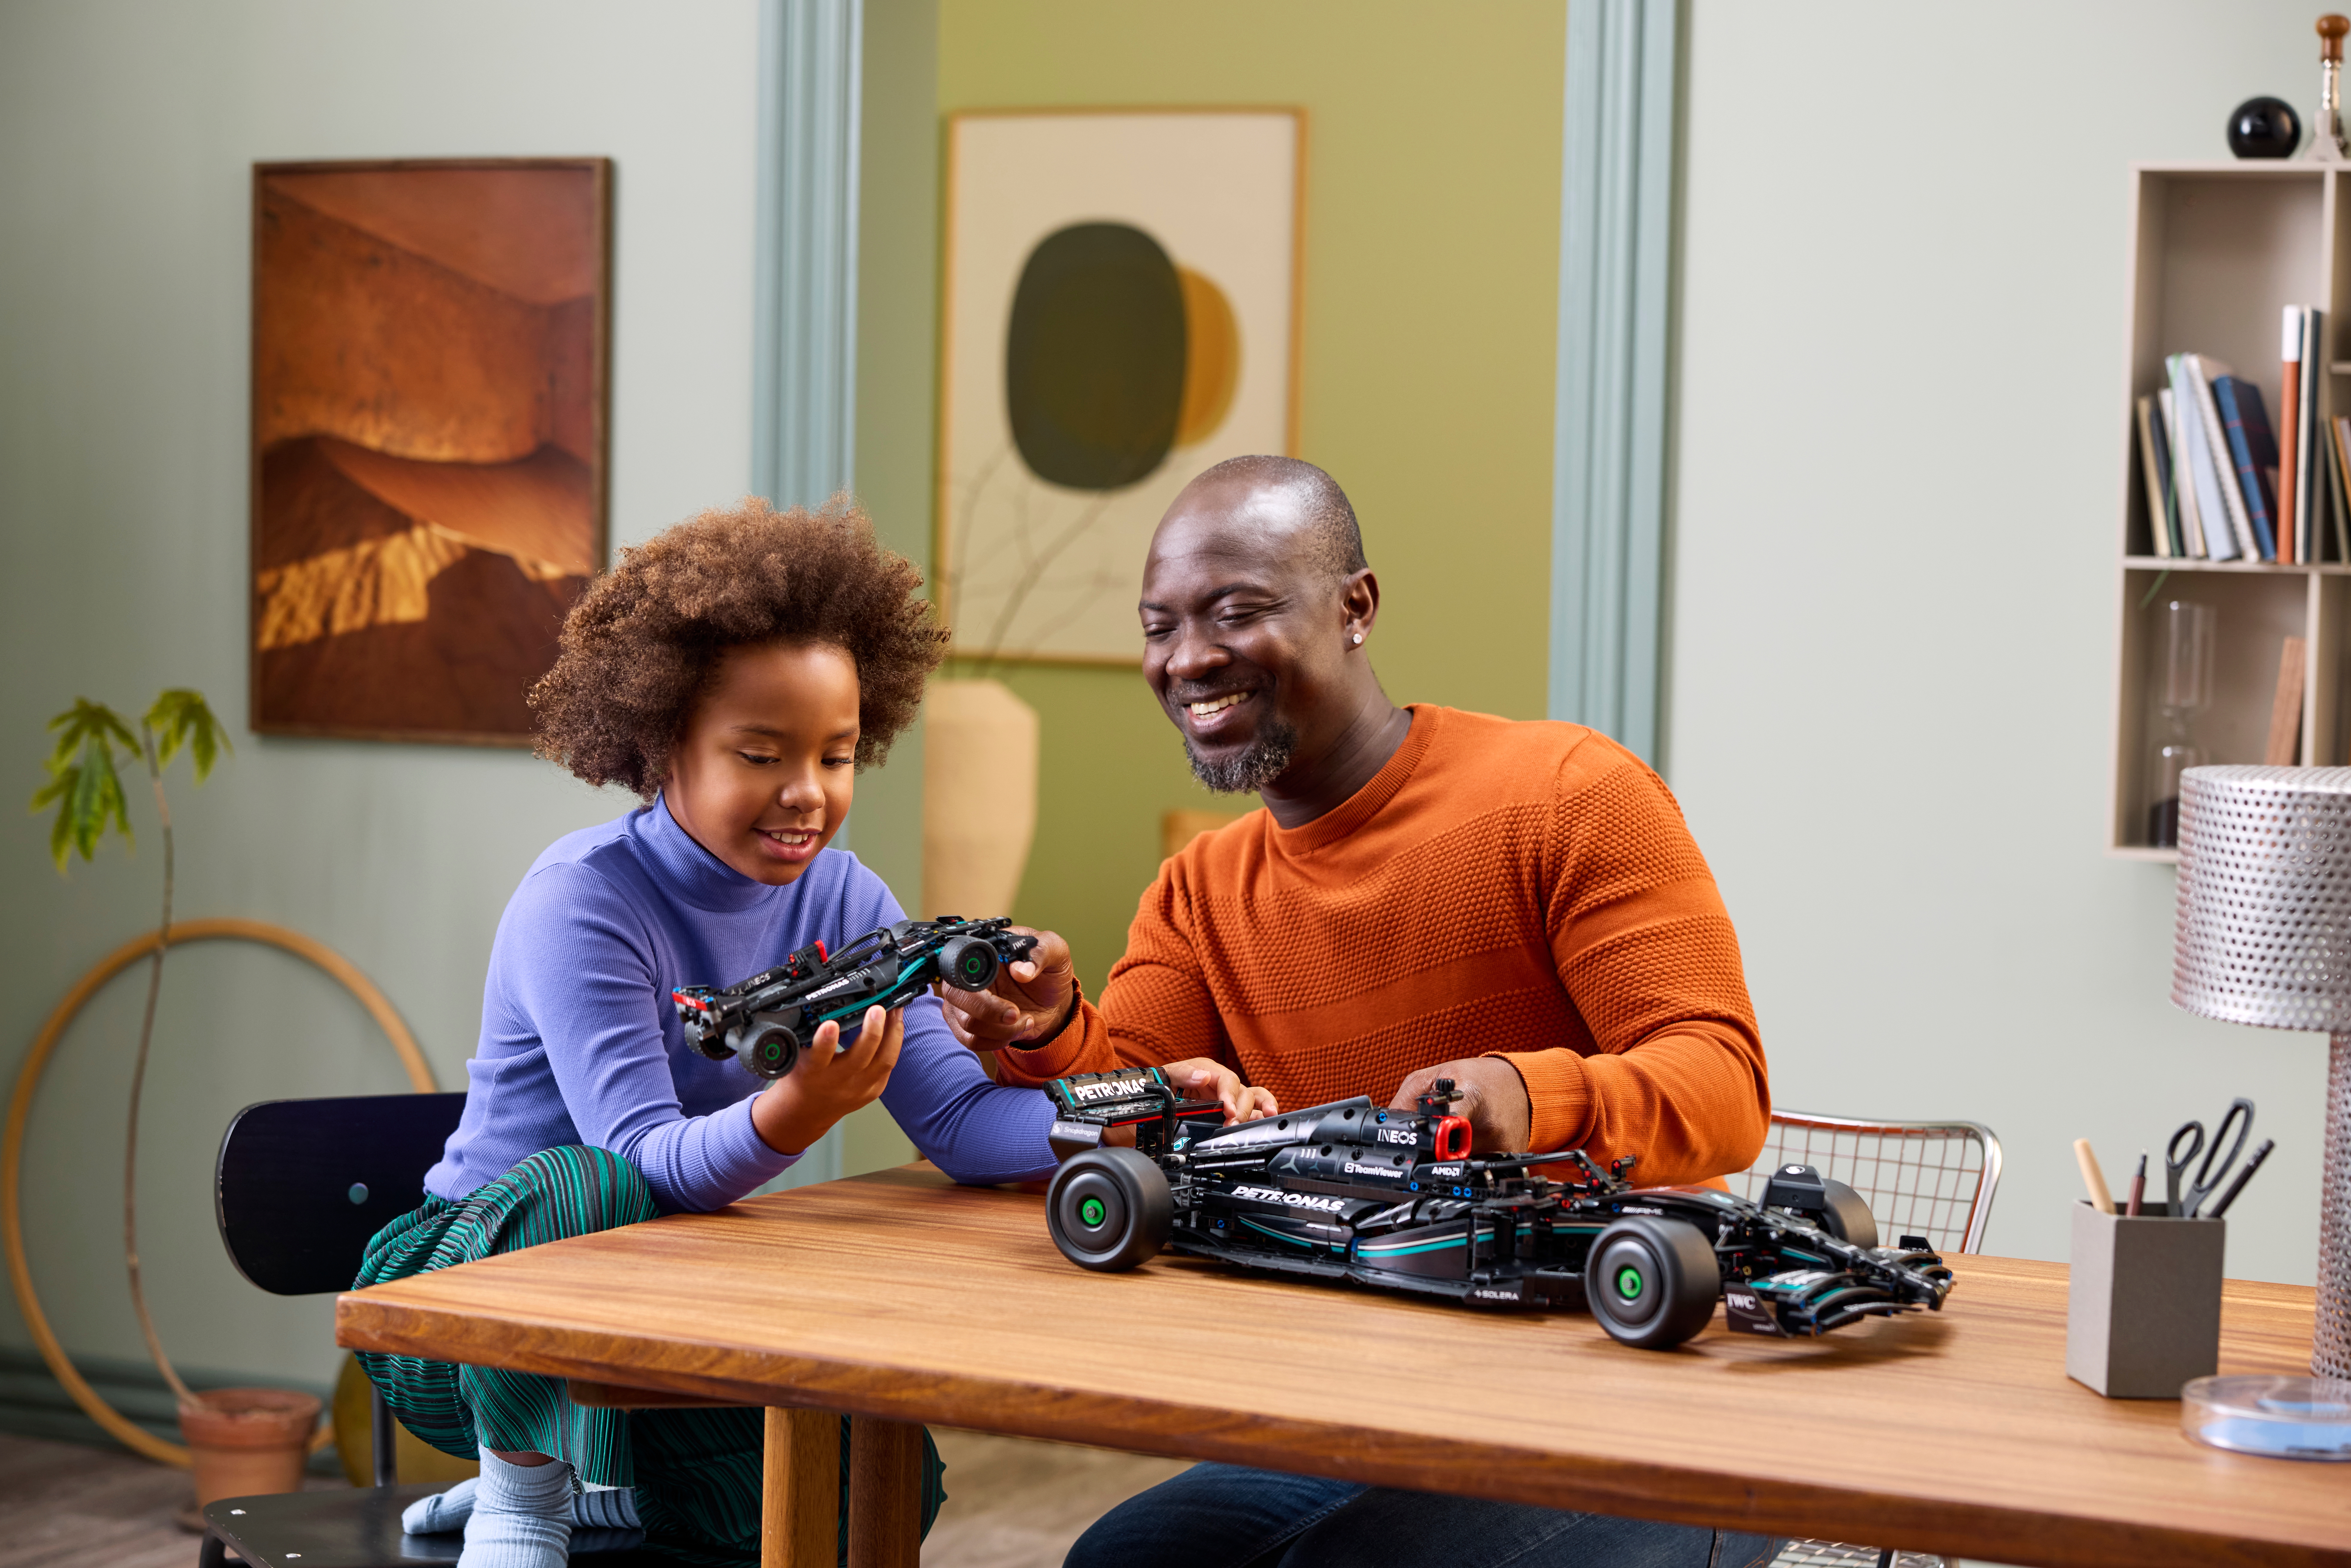 Image of a man with a orange shirt and a girl in a purple shirt looking and building the LEGO Technic 42171 car